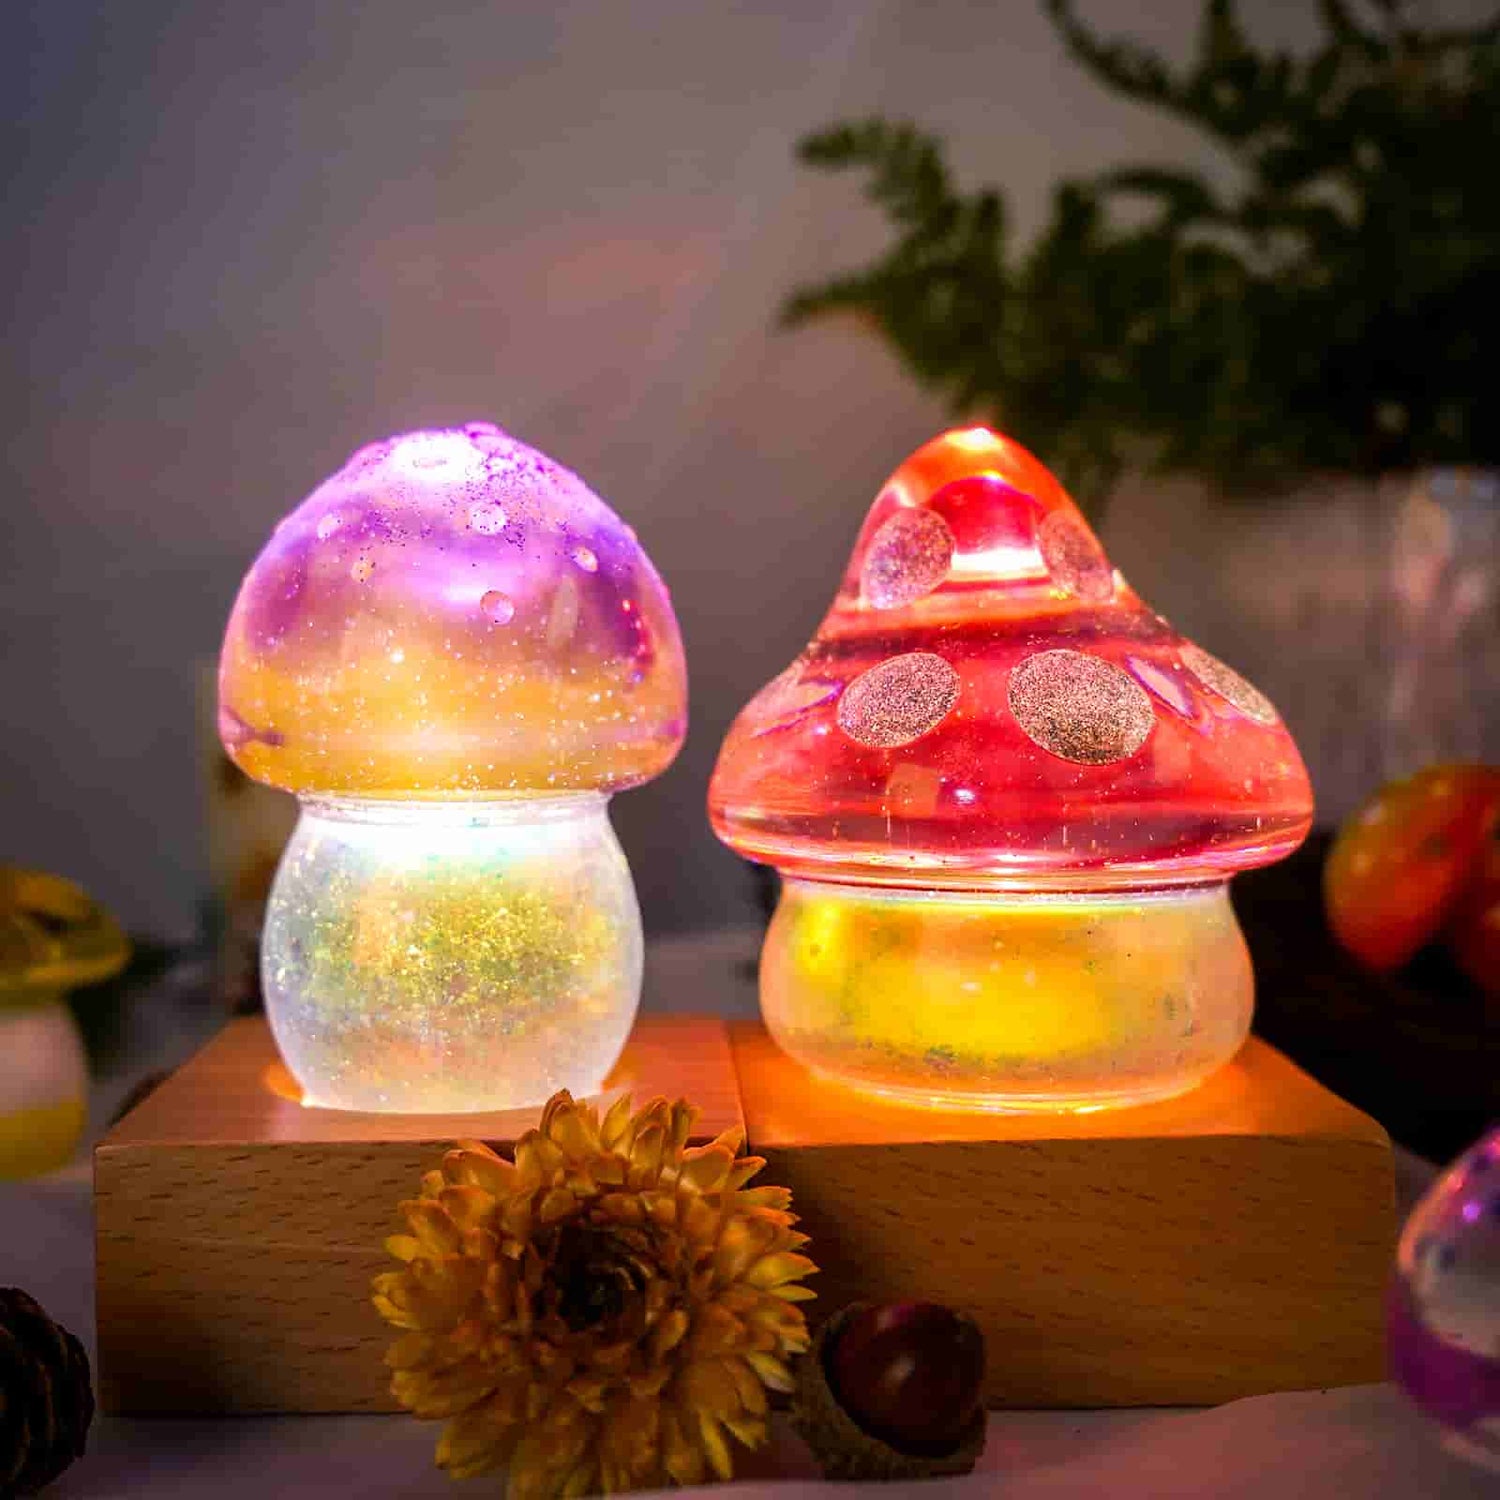 18mm Mushroom Silicone Mold – The Crafts and Glitter Shop